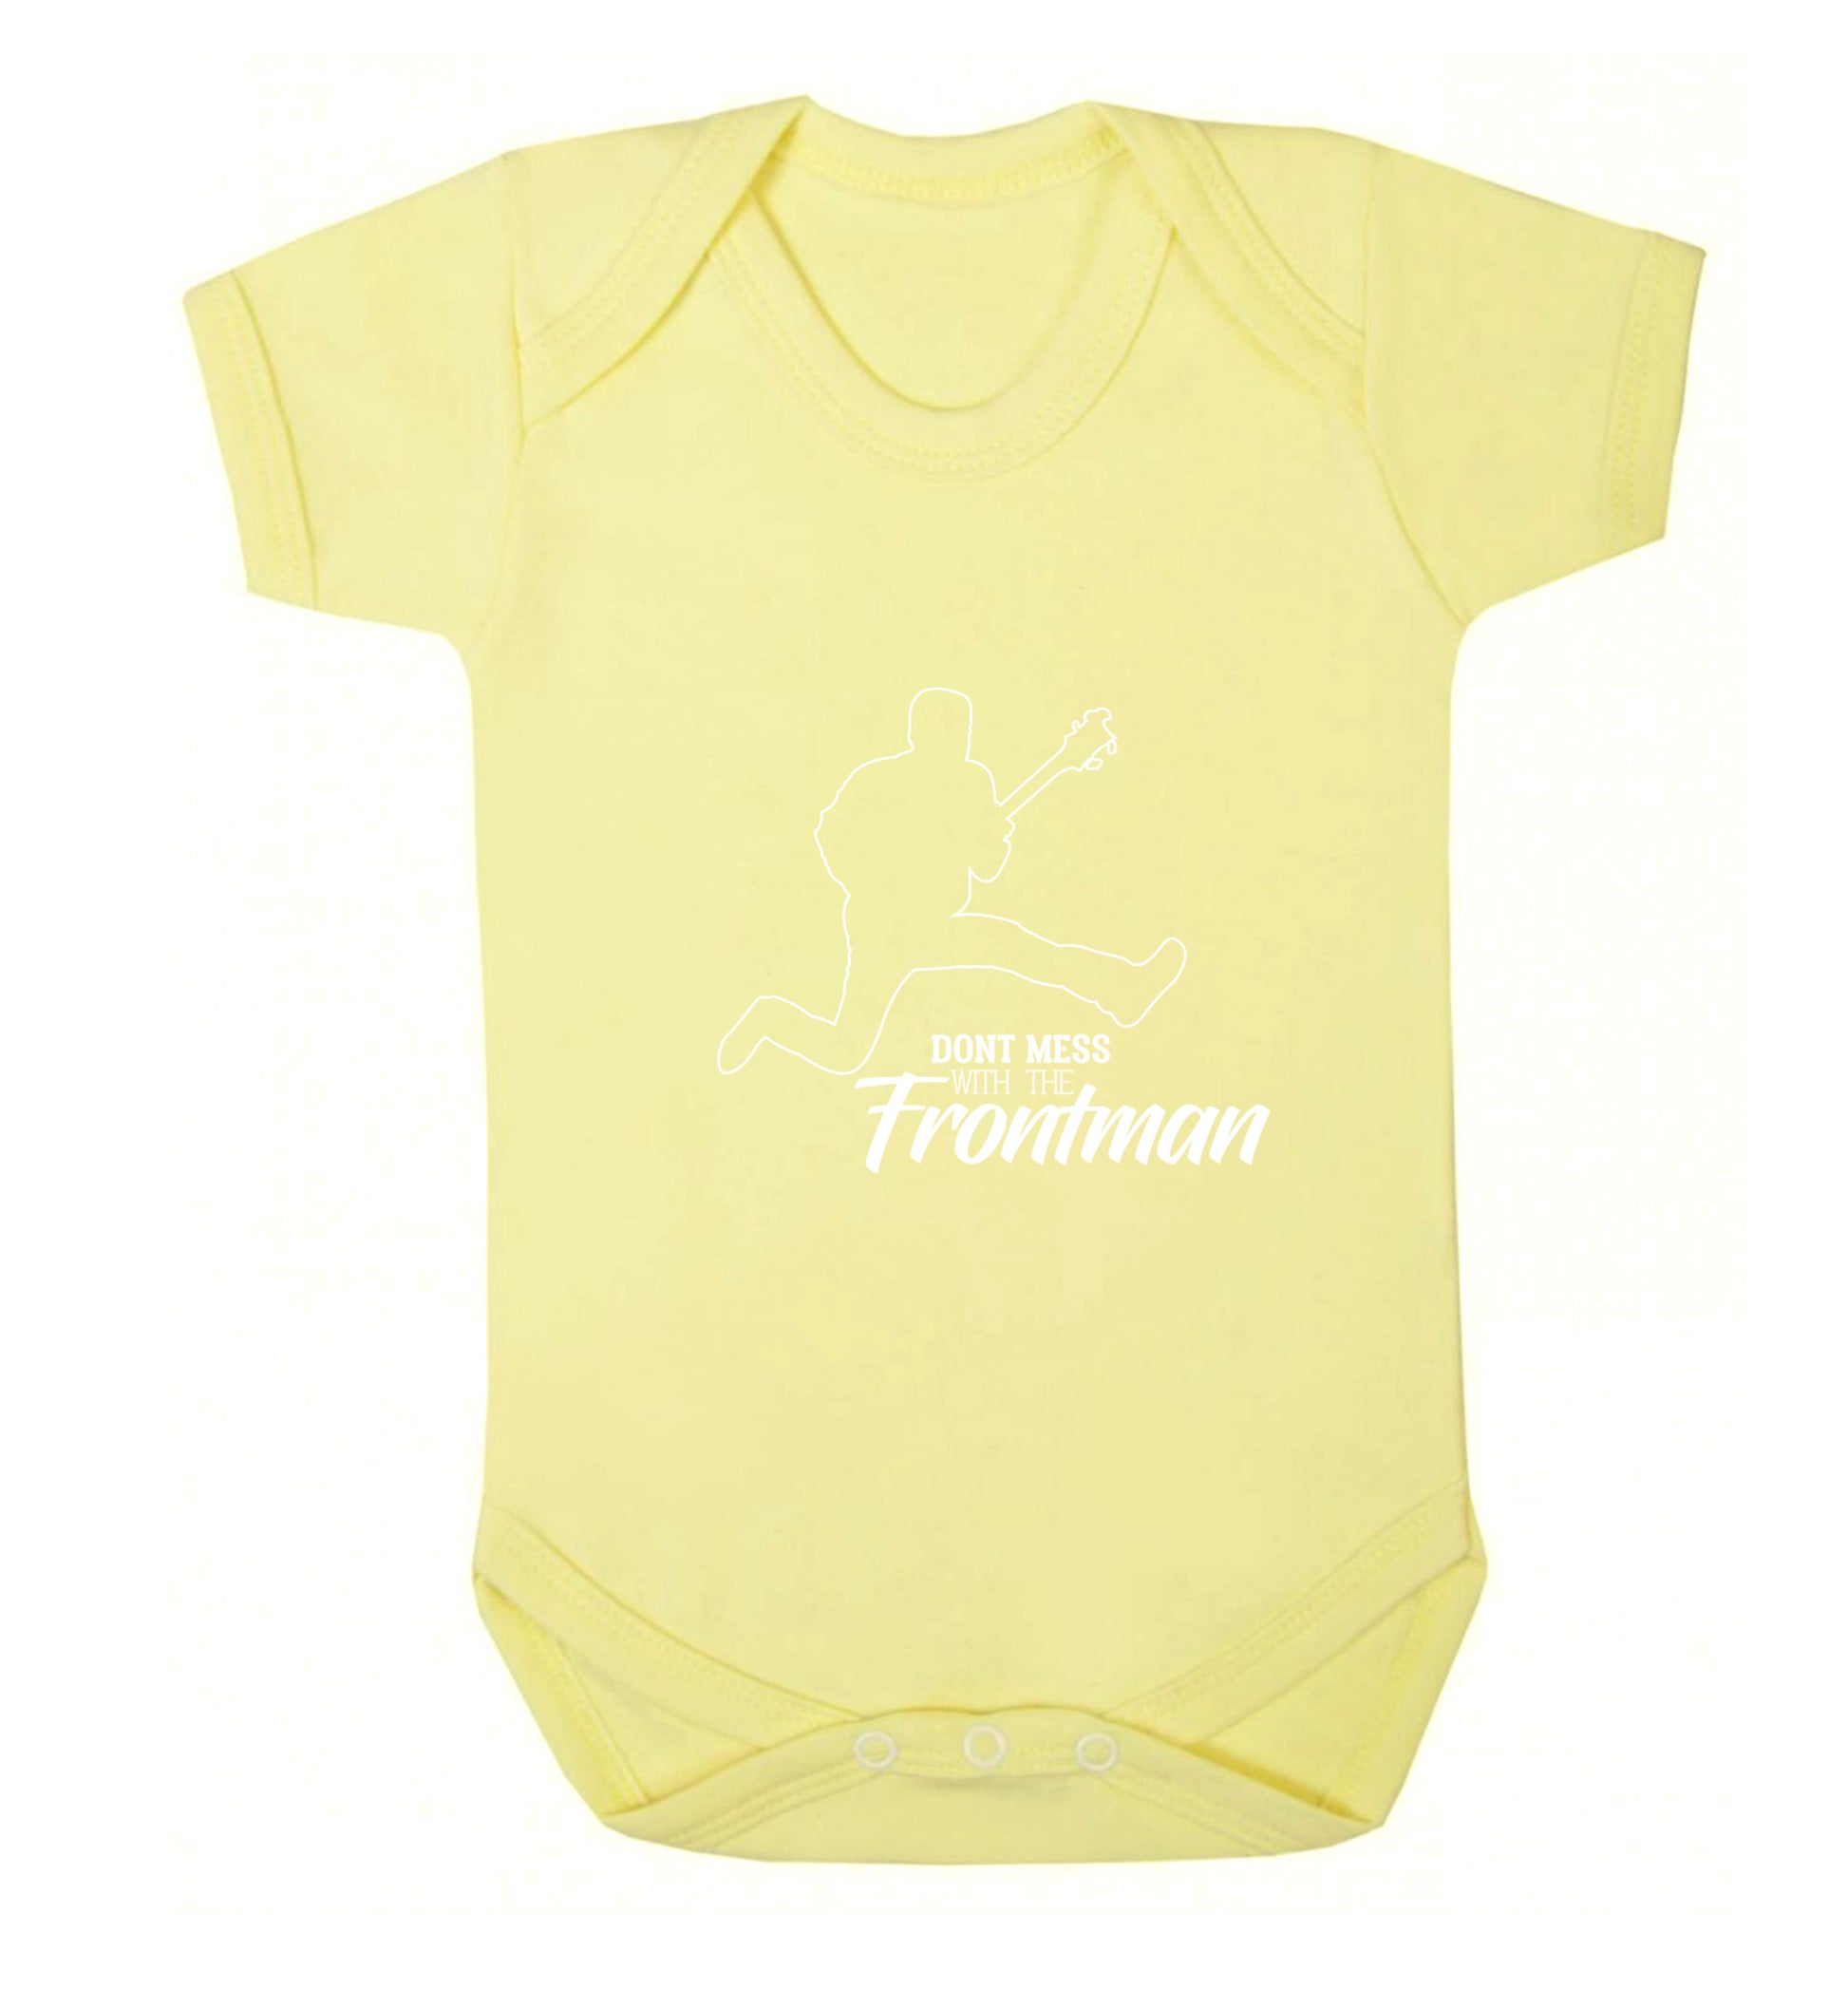 Don't mess with the frontman Baby Vest pale yellow 18-24 months